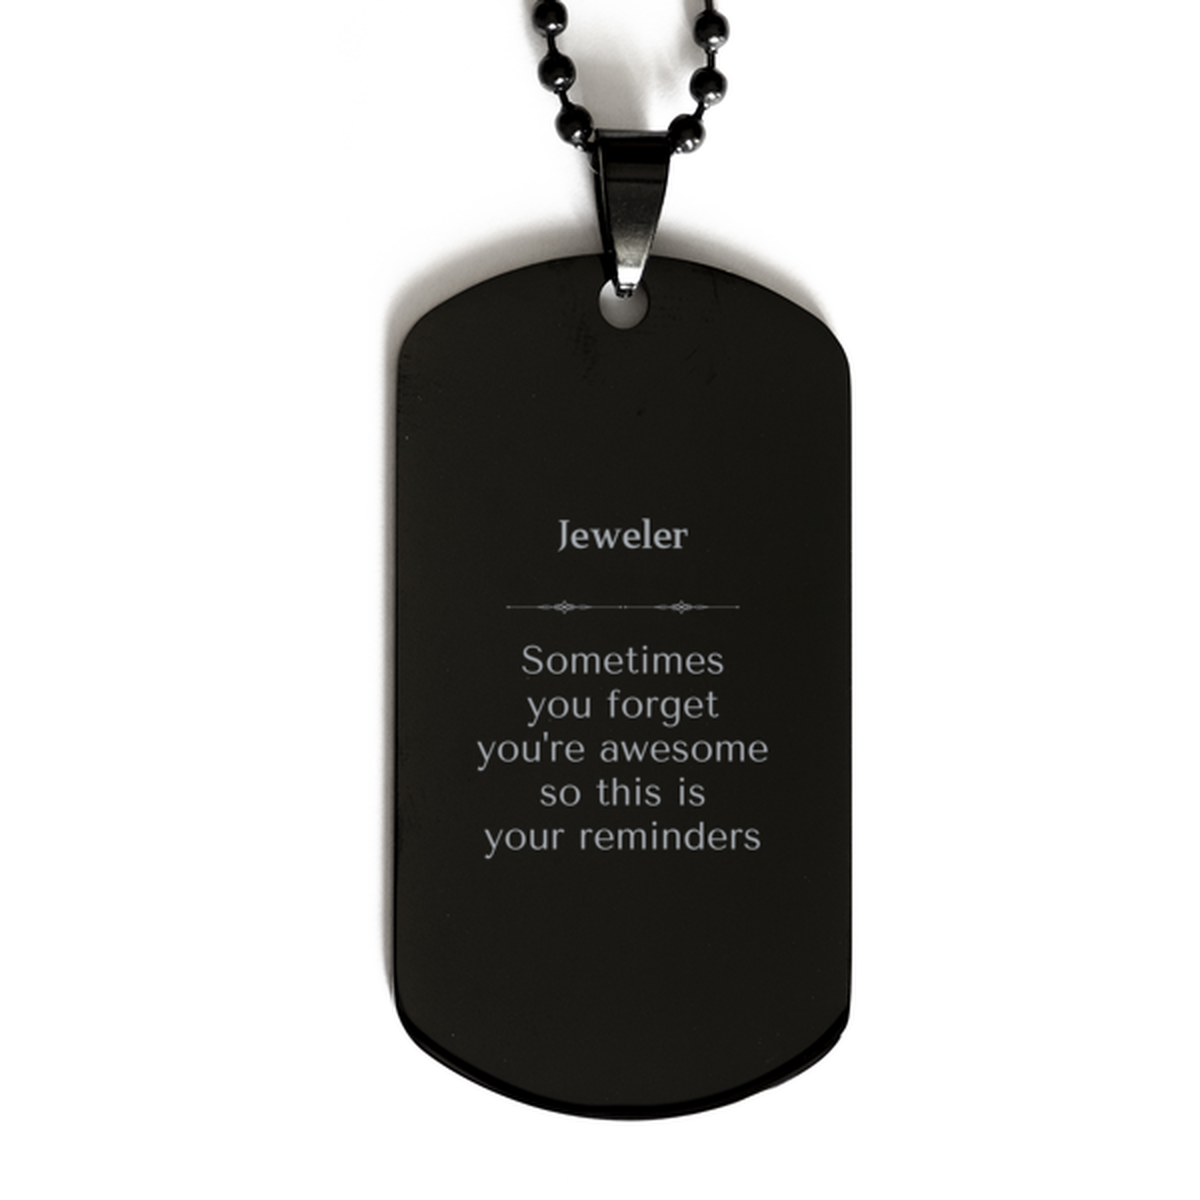 Sentimental Jeweler Black Dog Tag, Jeweler Sometimes you forget you're awesome so this is your reminders, Graduation Christmas Birthday Gifts for Jeweler, Men, Women, Coworkers